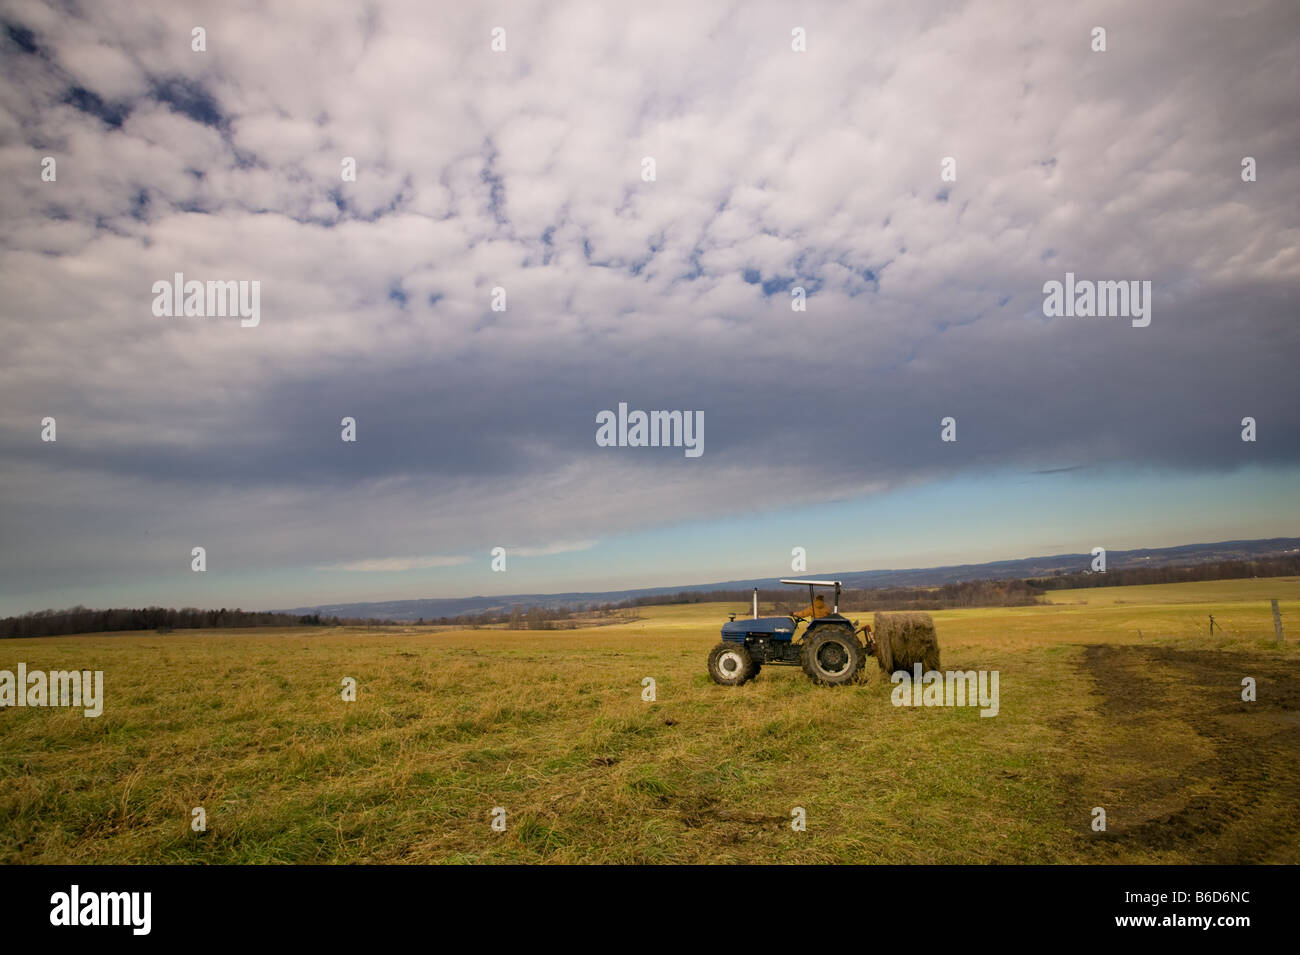 Woman operating a tractor baling hay on a farm in New York State in November Stock Photo